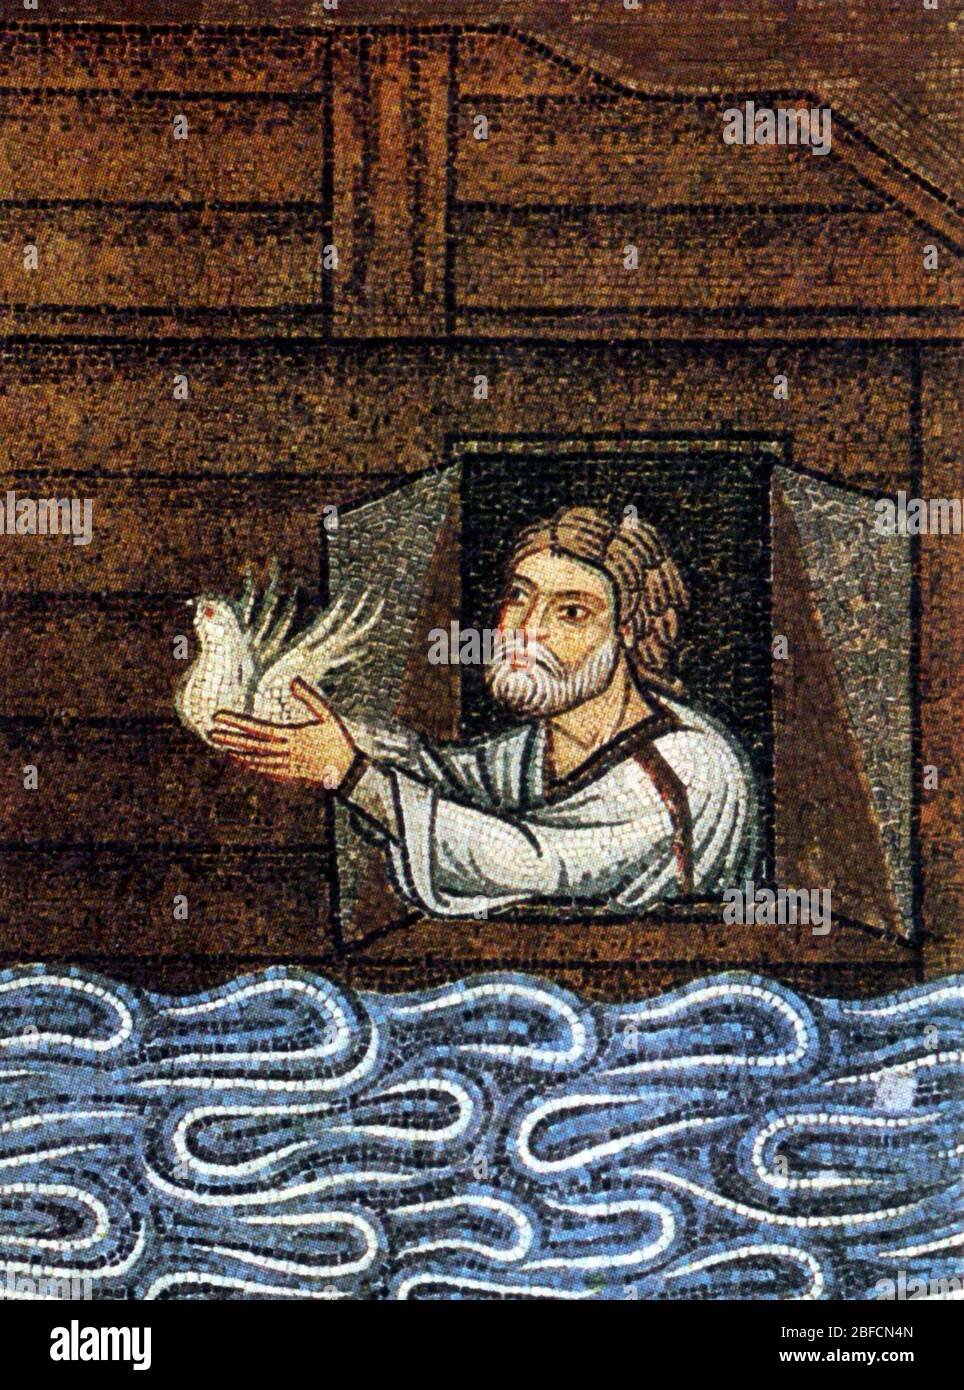 NOAH releases a dove from the Ark in a 12 century  mosaic in the Basilica San Marco, Venice. Stock Photo